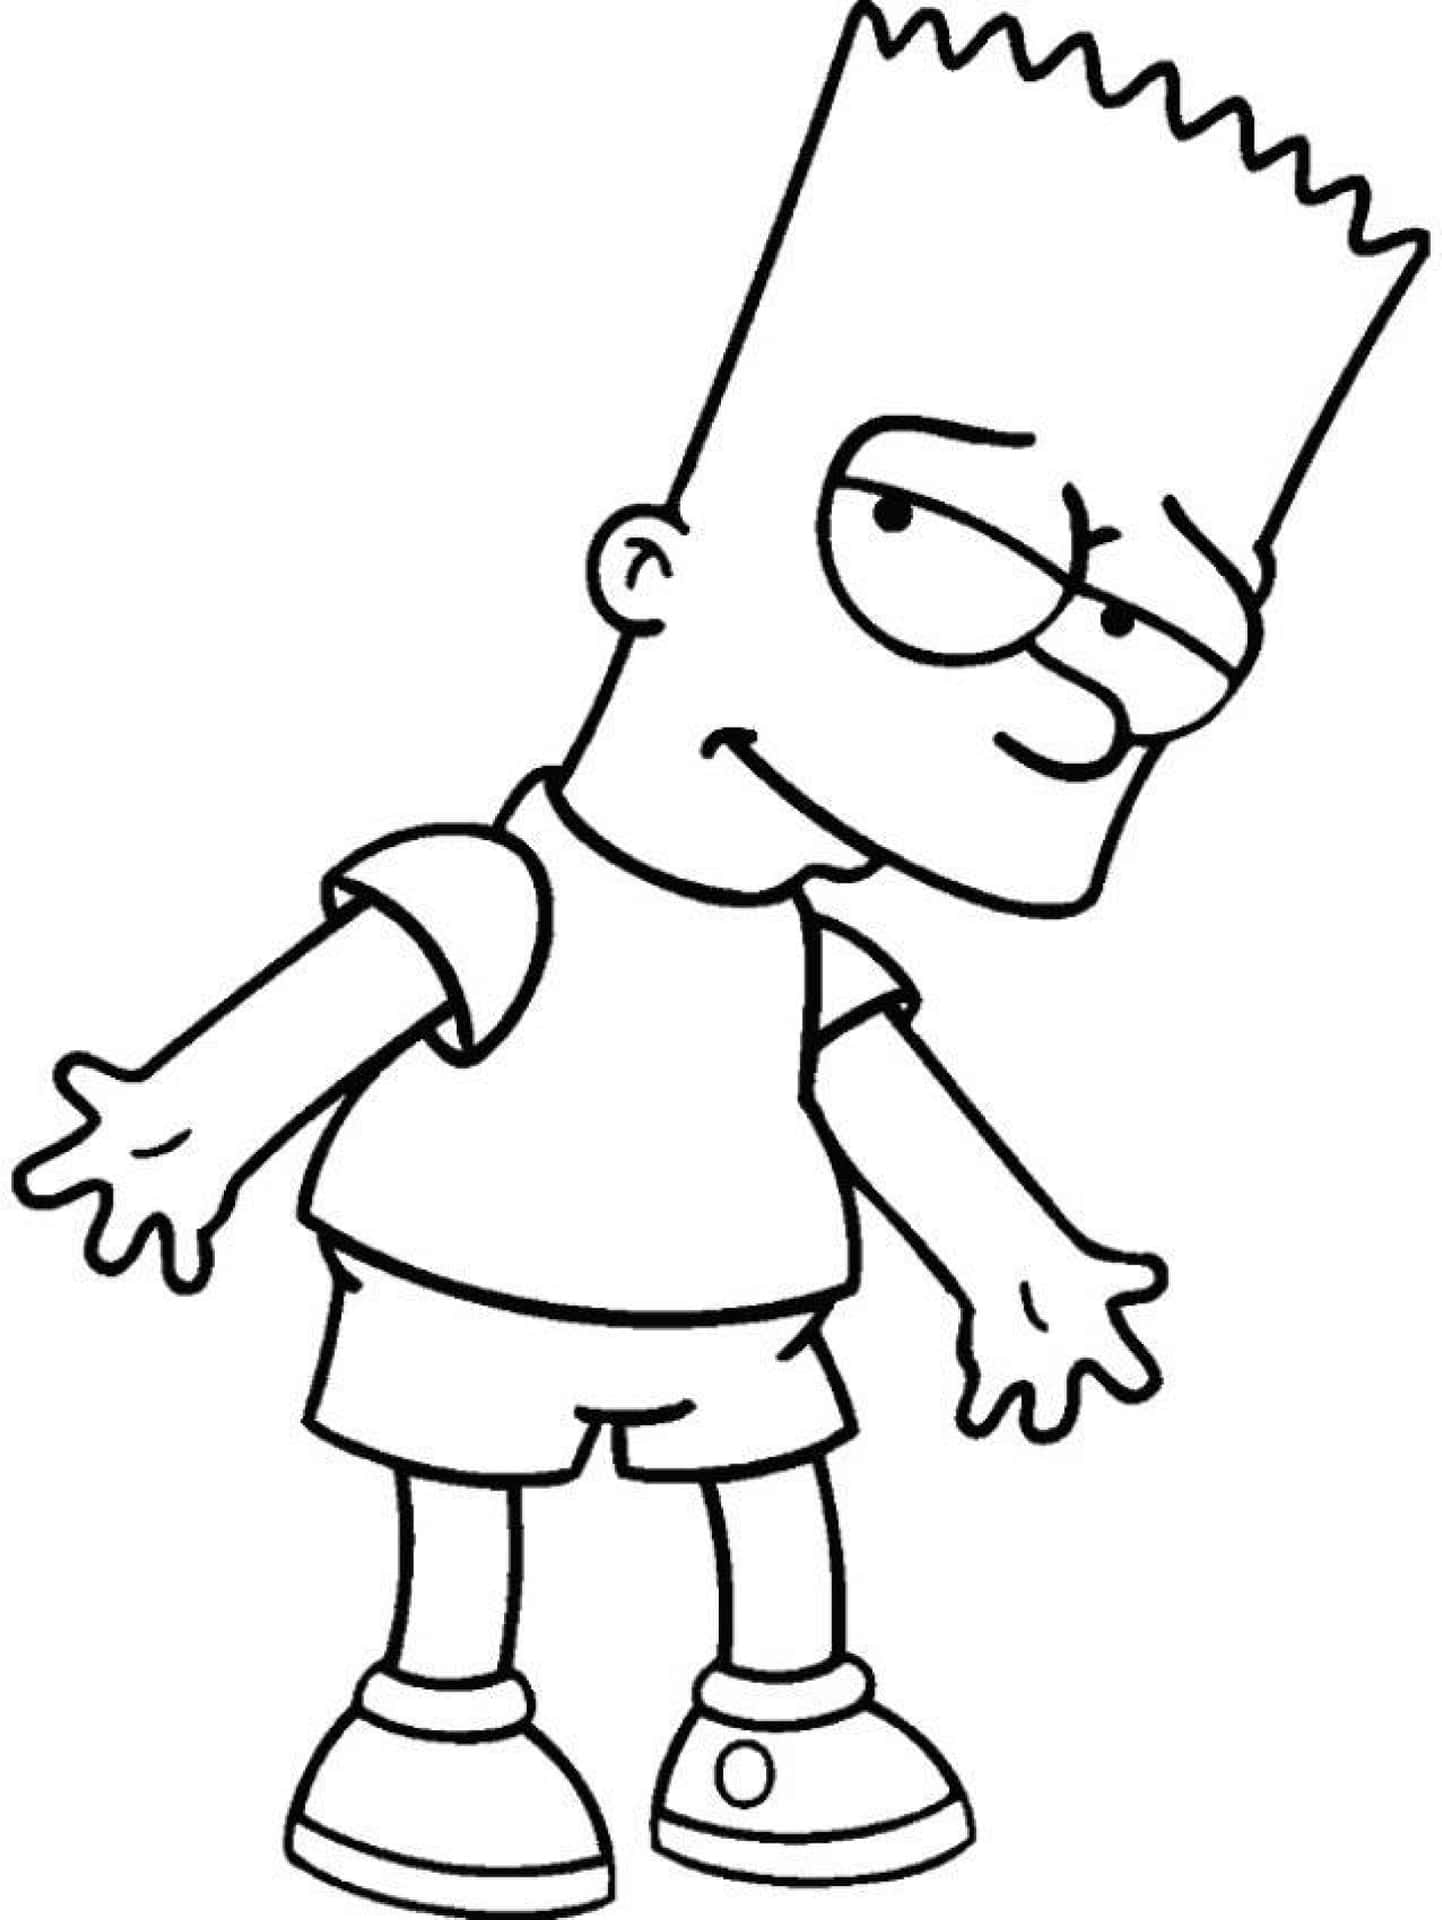 Download the simpsons coloring pages